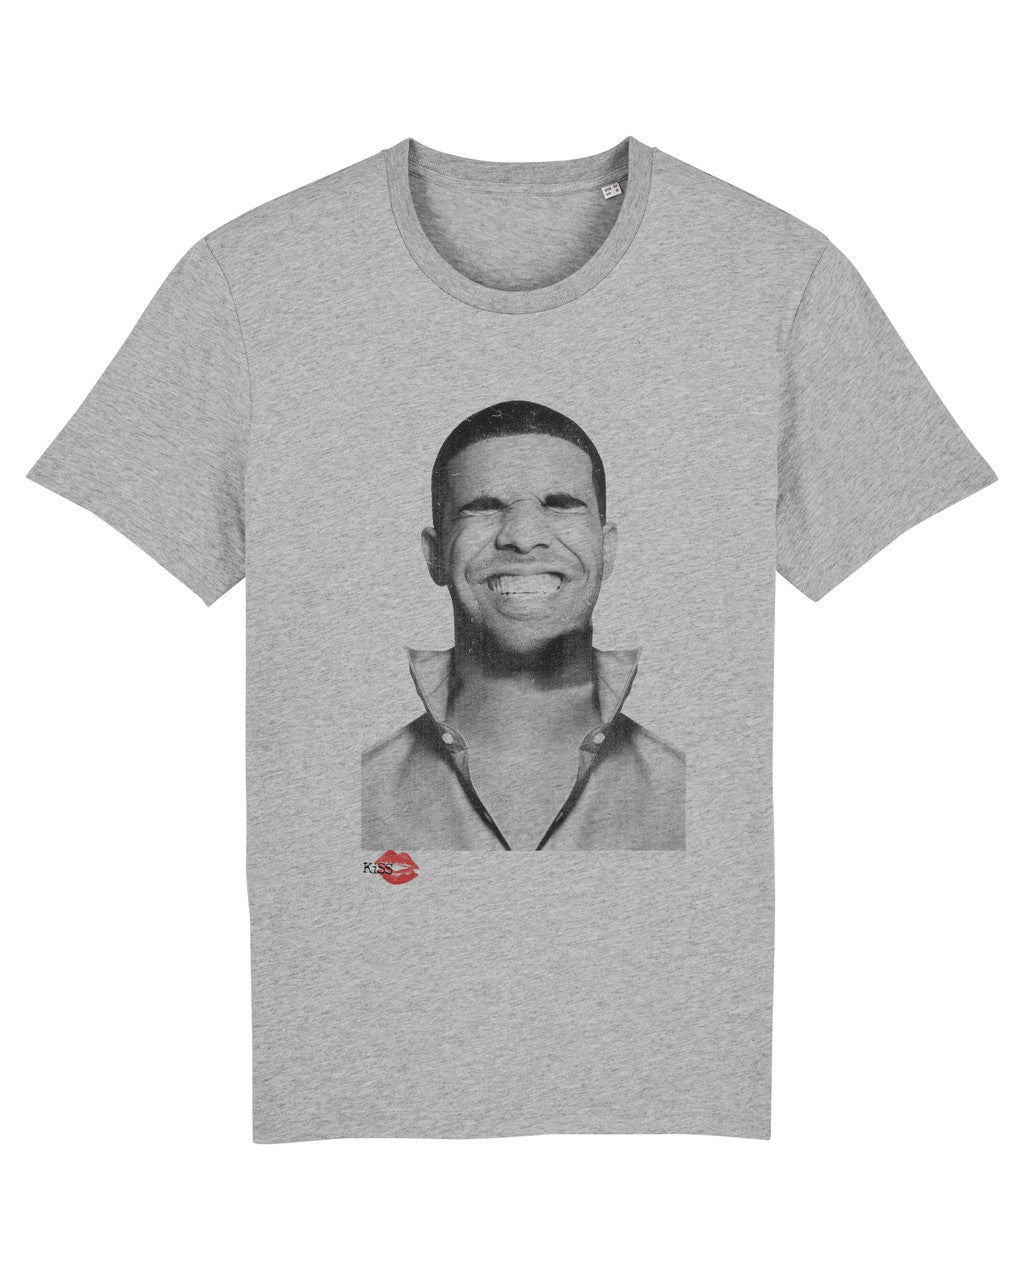 Drake KiSS T-Shirt - Smiling - Music Rap - Aubrey Graham - Drizzy - Nothing Was the Same